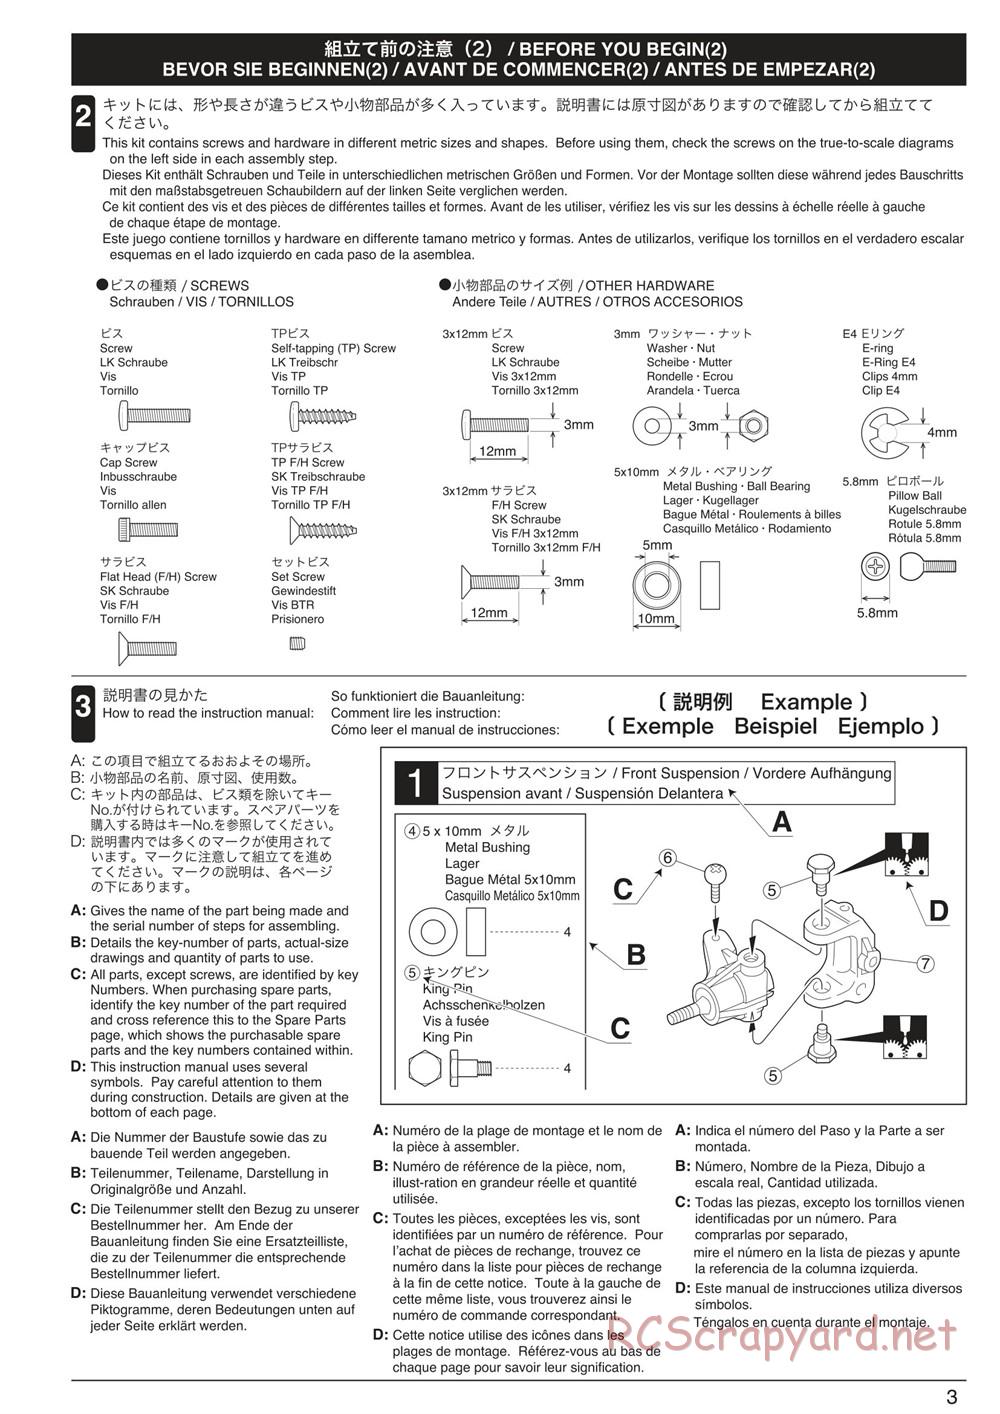 Kyosho - Mad Crusher - Manual - Page 3